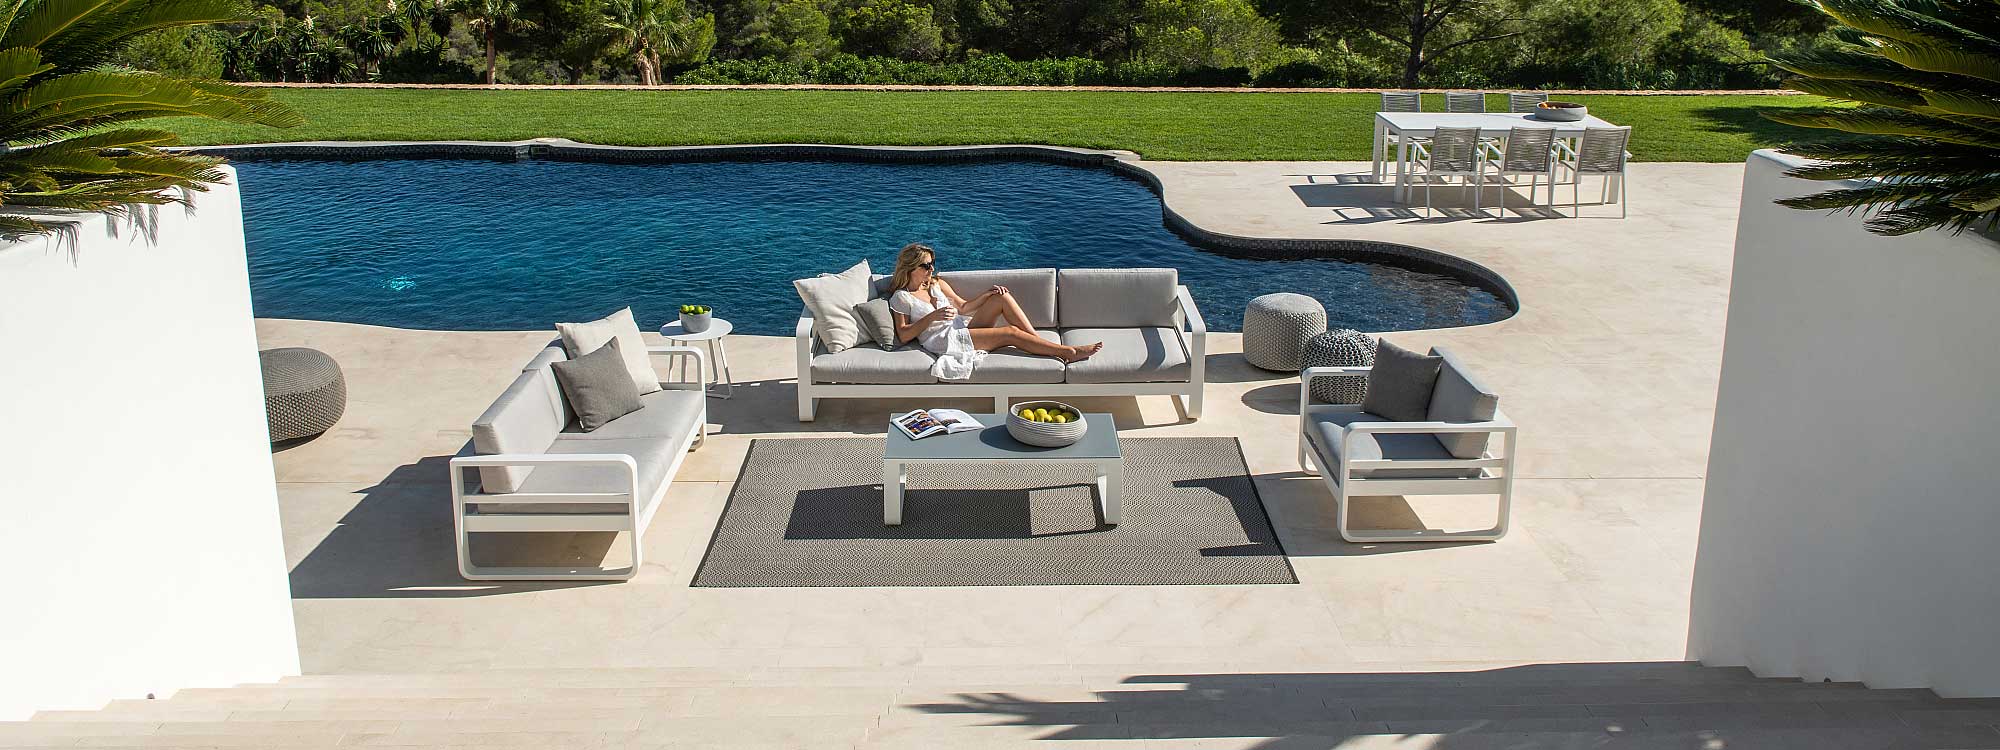 Image of woman lying back in Reno white aluminium garden sofa with grey cushions, shown on poolside surrounded by lawn and white-washed raised flower beds